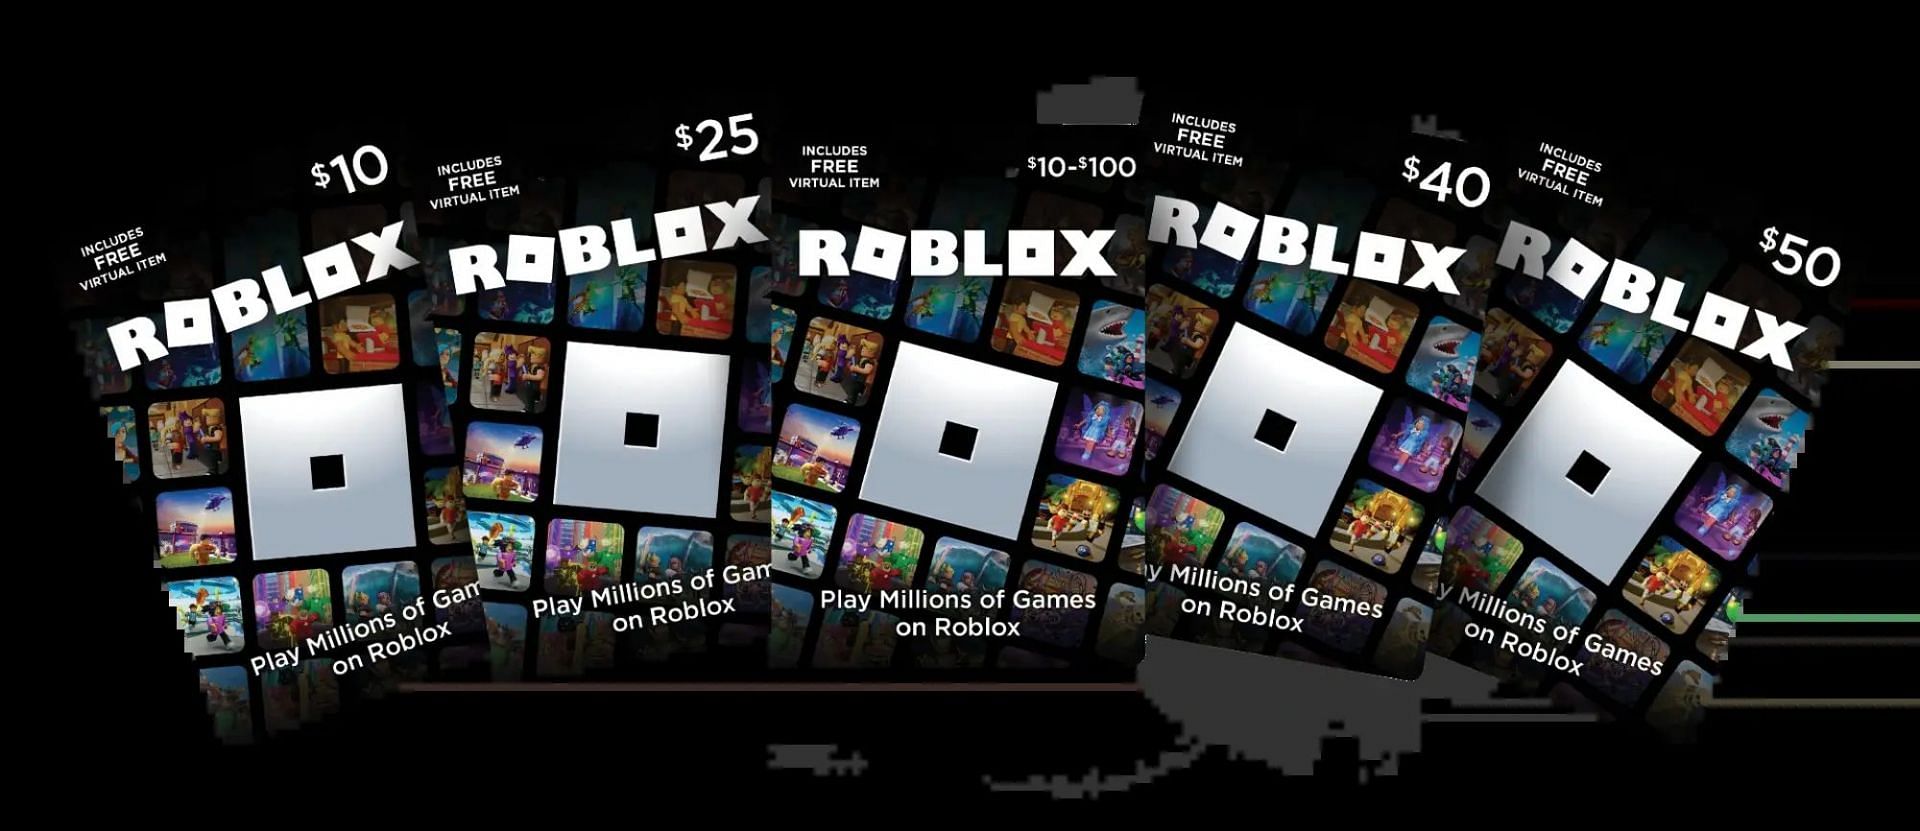 How to Claim Roblox Gift Card on Mobile Device 